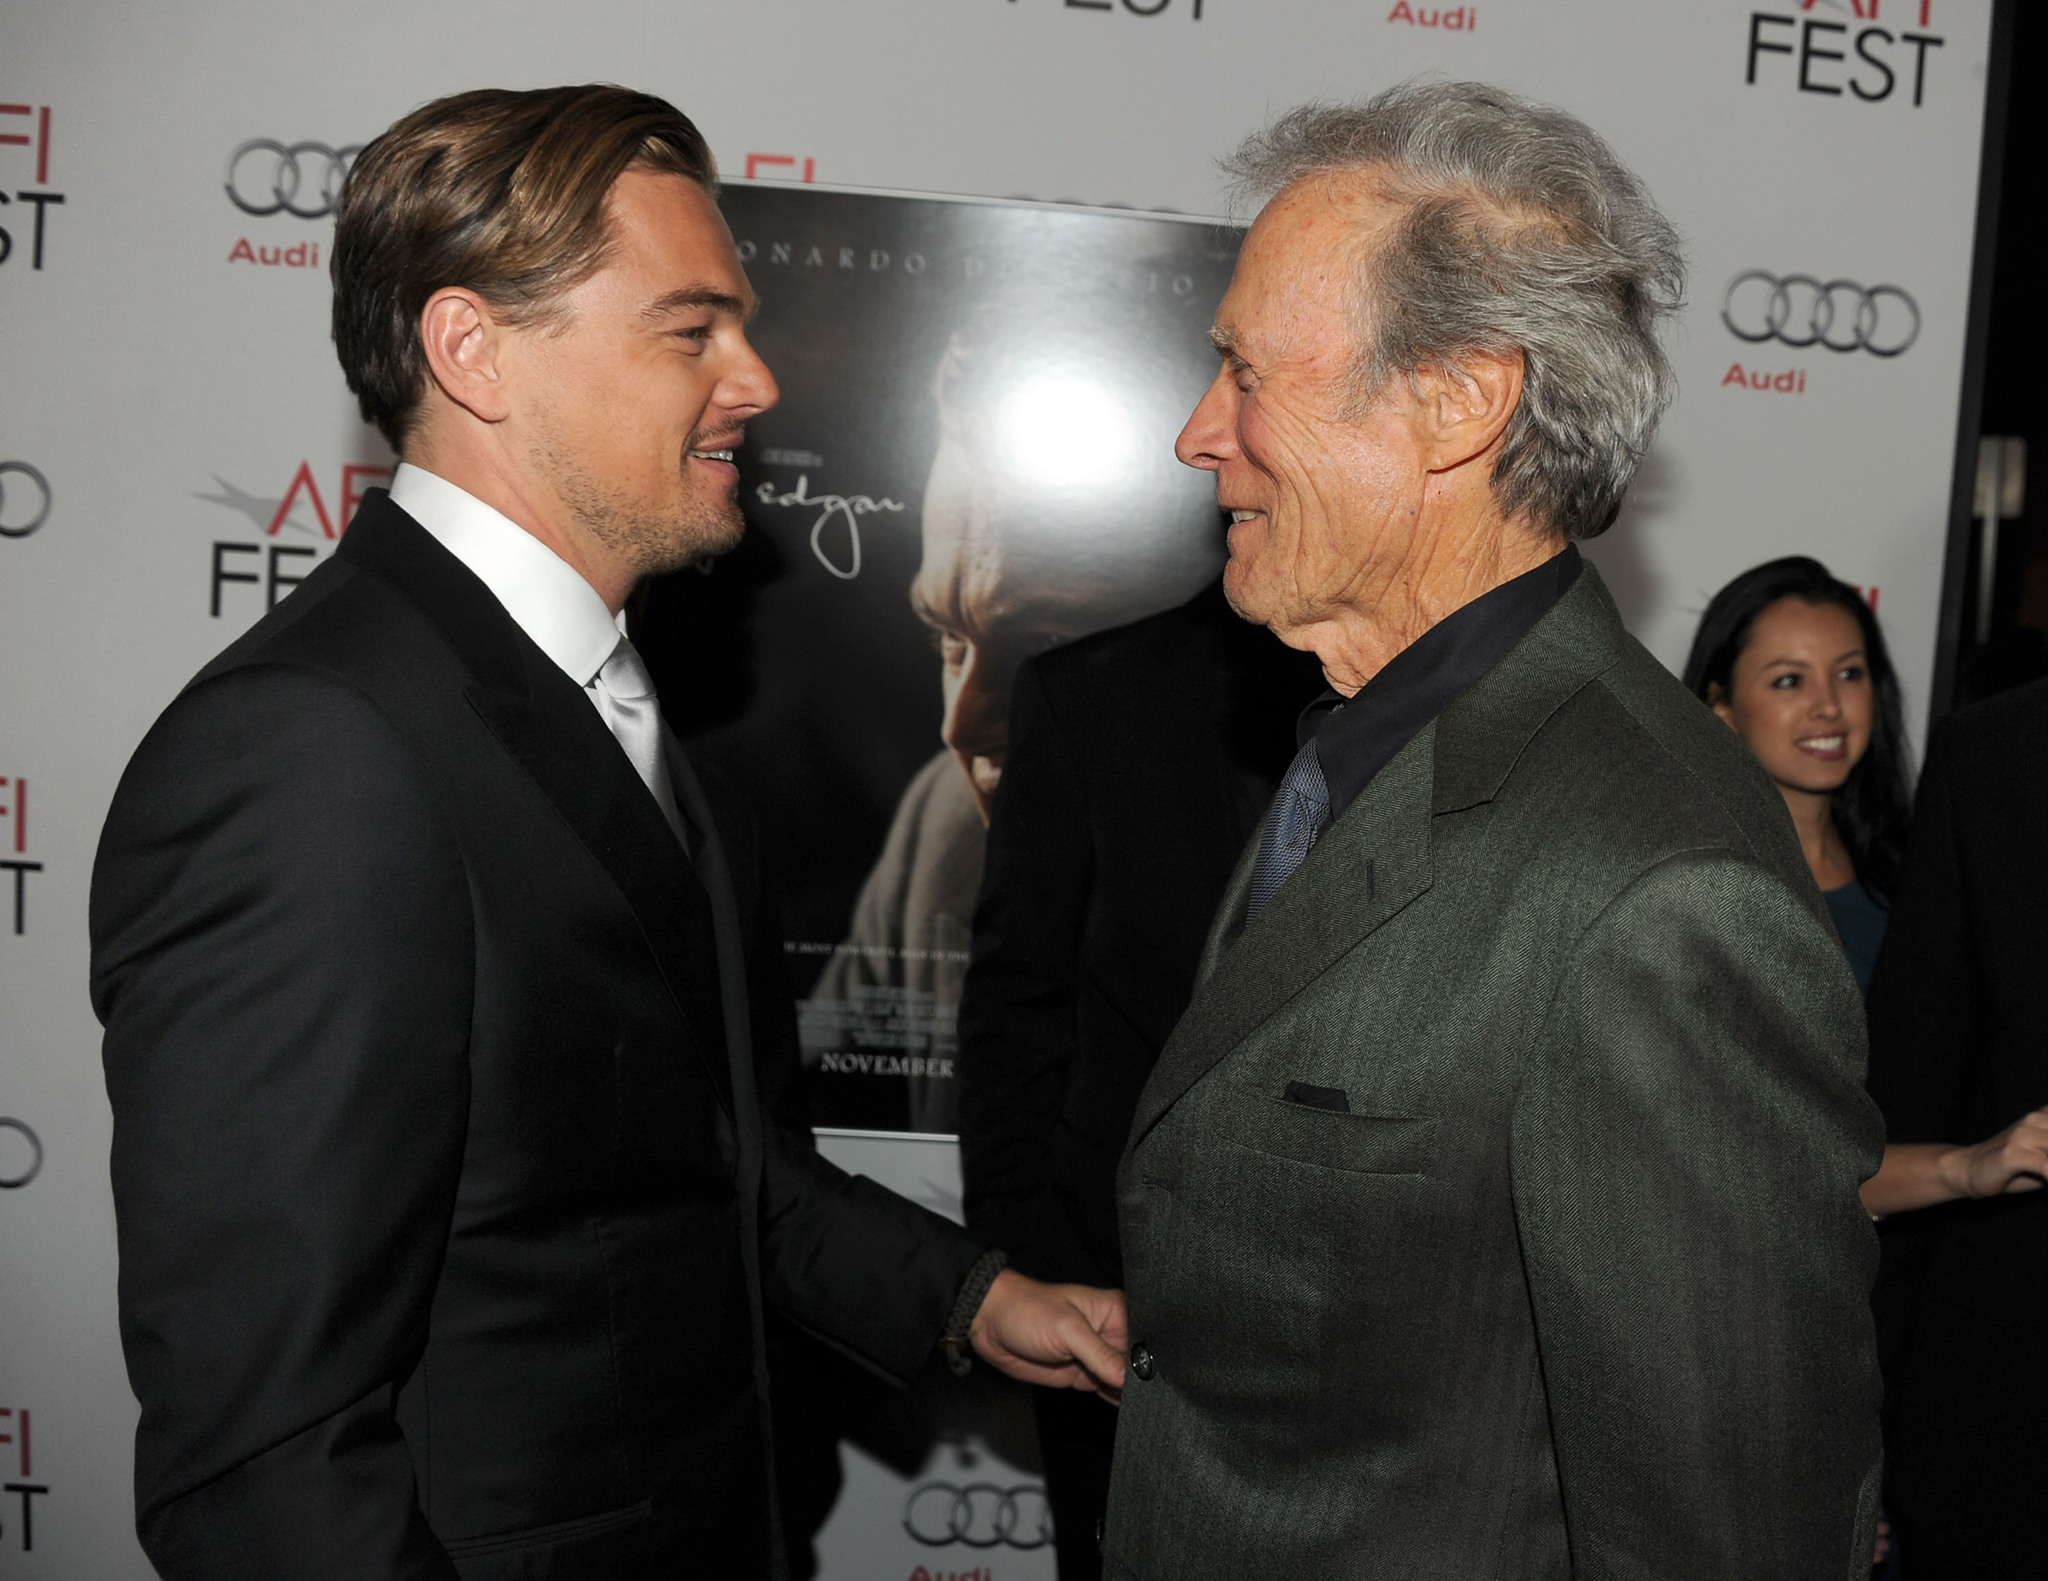 Leonardo DiCaprio and Clint Eastwood at event of J. Edgar (2011)